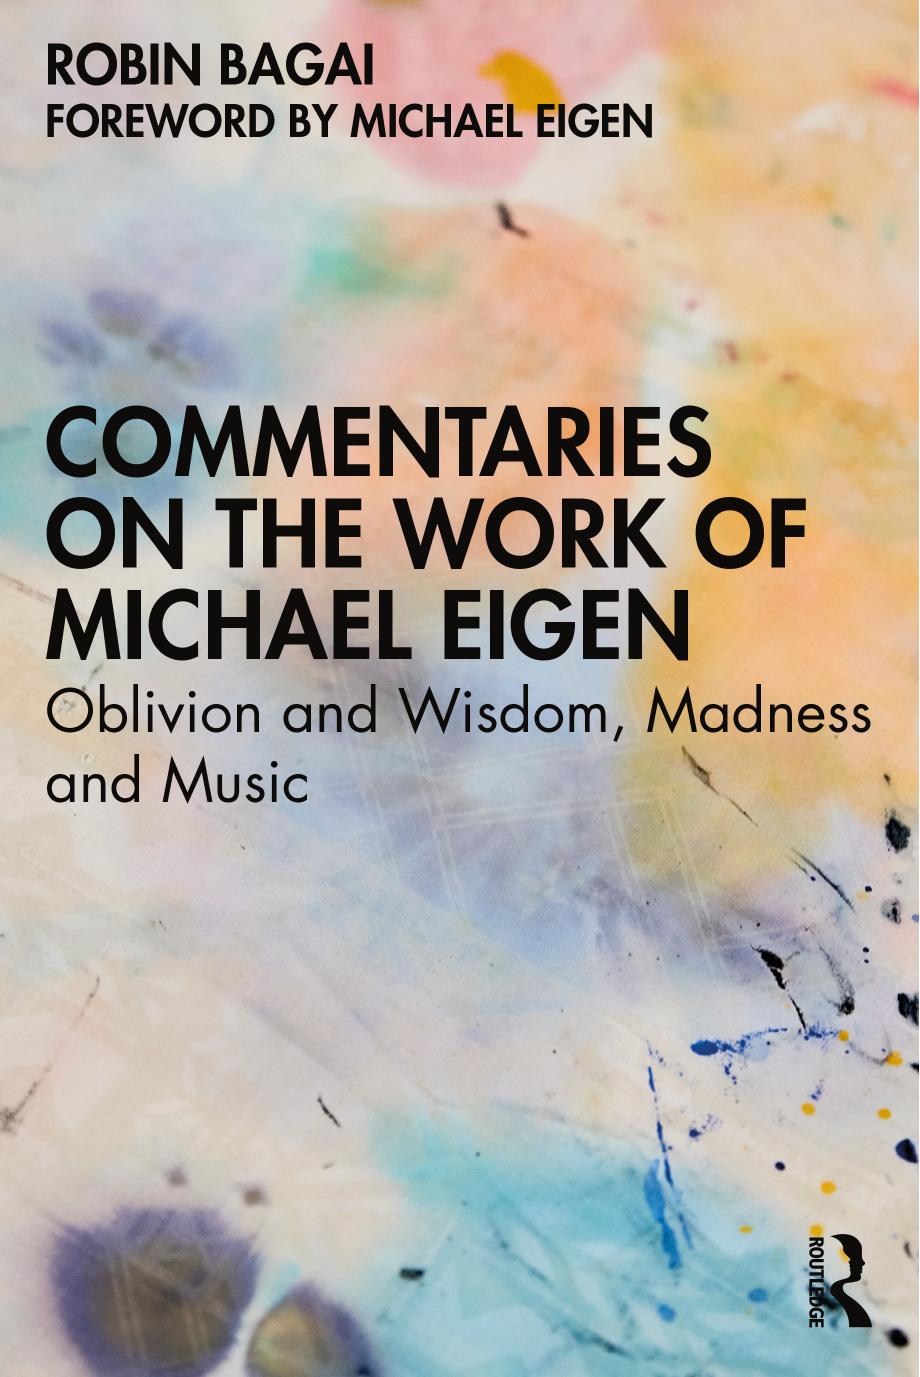 Commentaries on the Work of Michael Eigen: Oblivion and Wisdom, Madness and Music by Robin Bagai